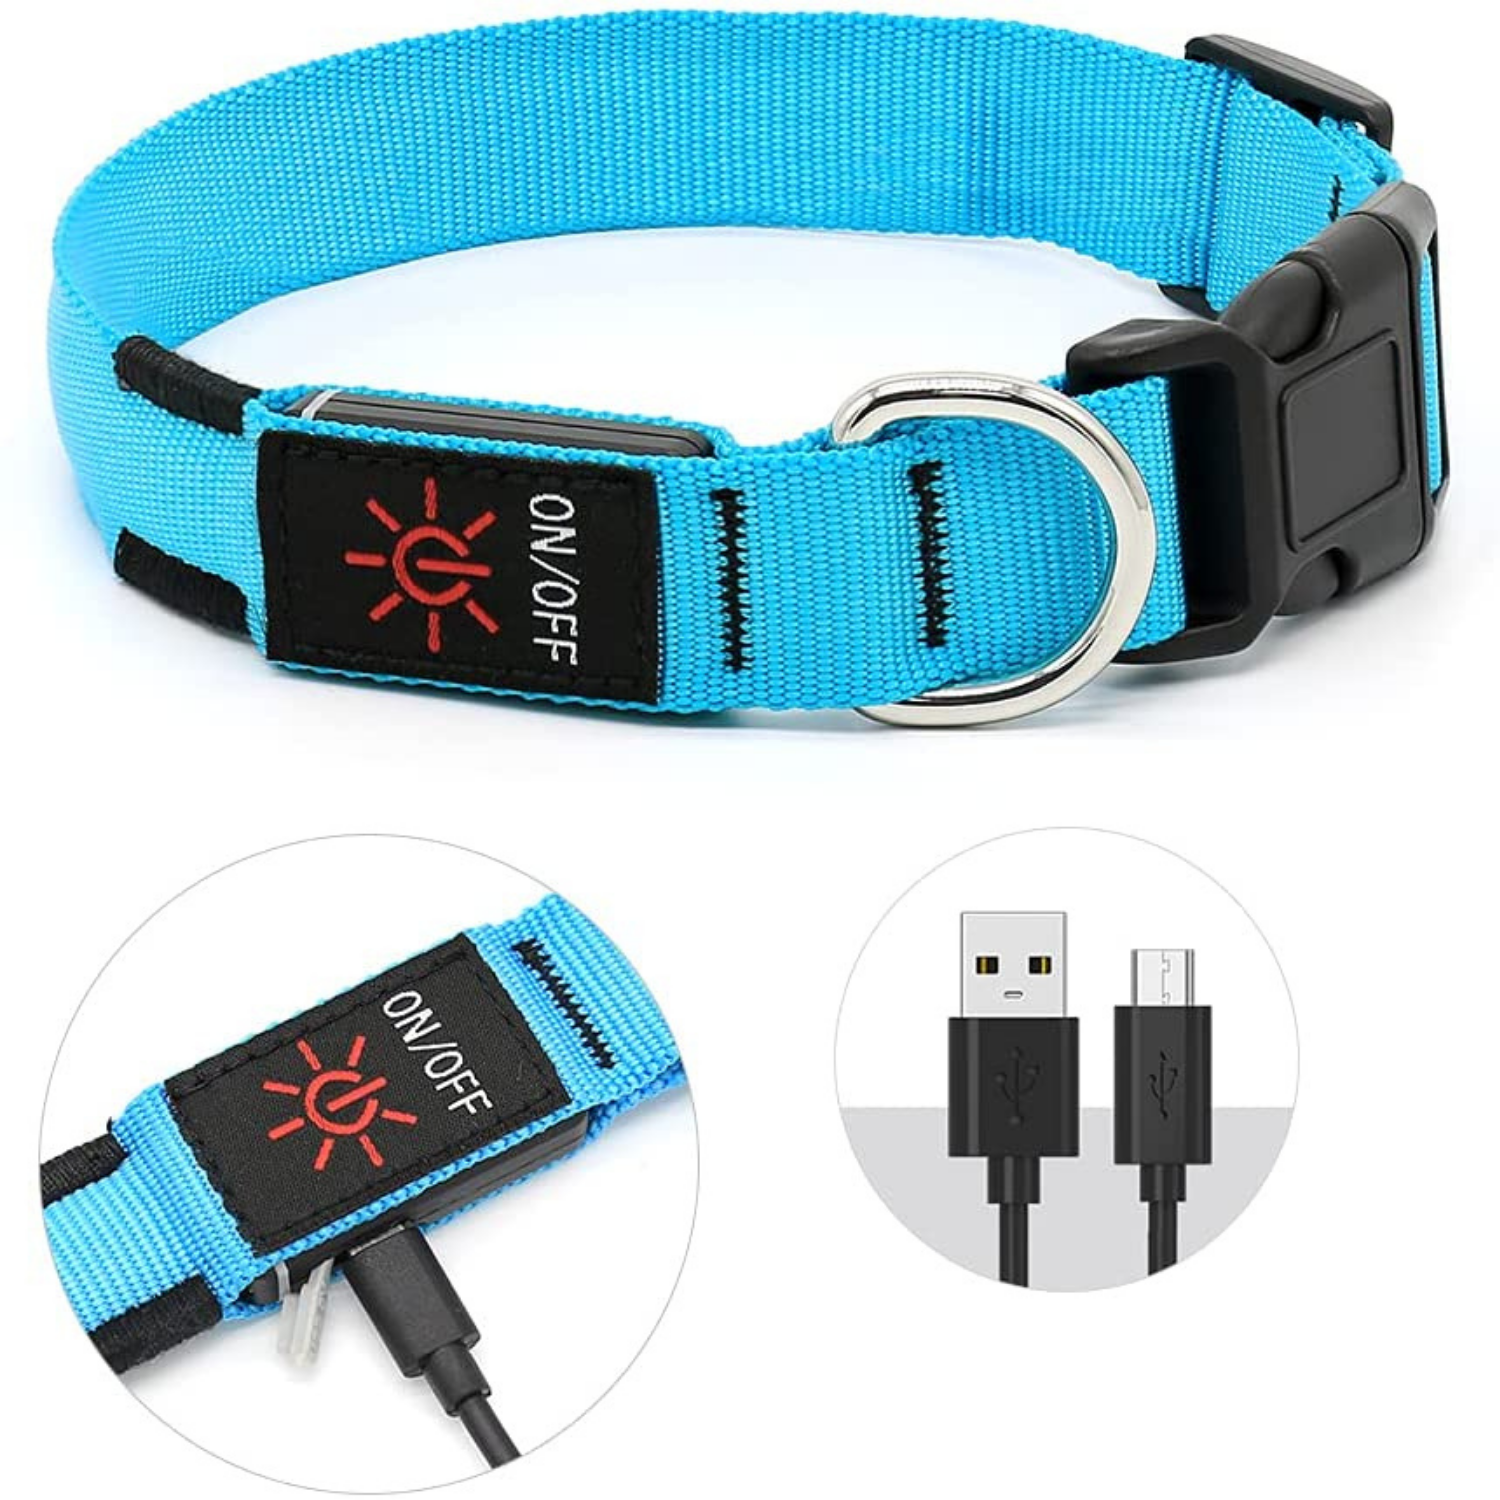 Collar with LED light for safe evening walks